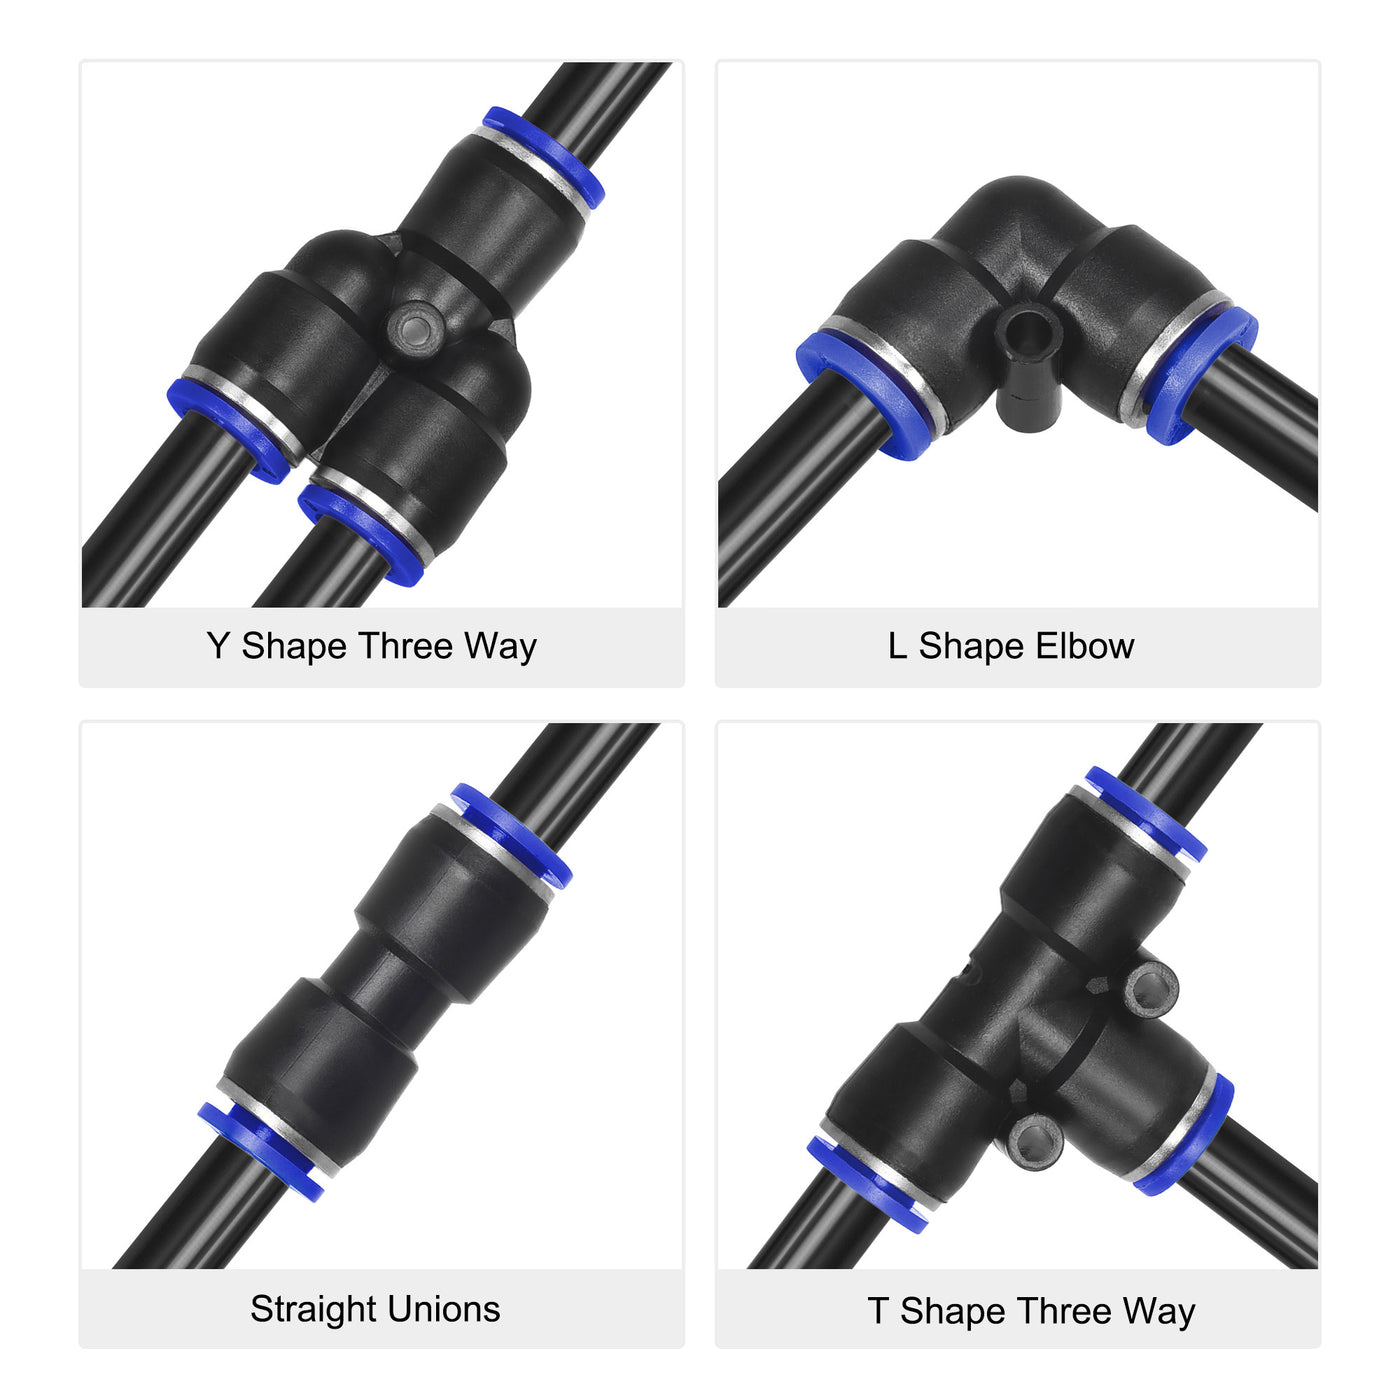 uxcell Uxcell Pneumatic Air Hose Tubing PU Air Compressor Tube Pipe with 7 Type Connect Fittings